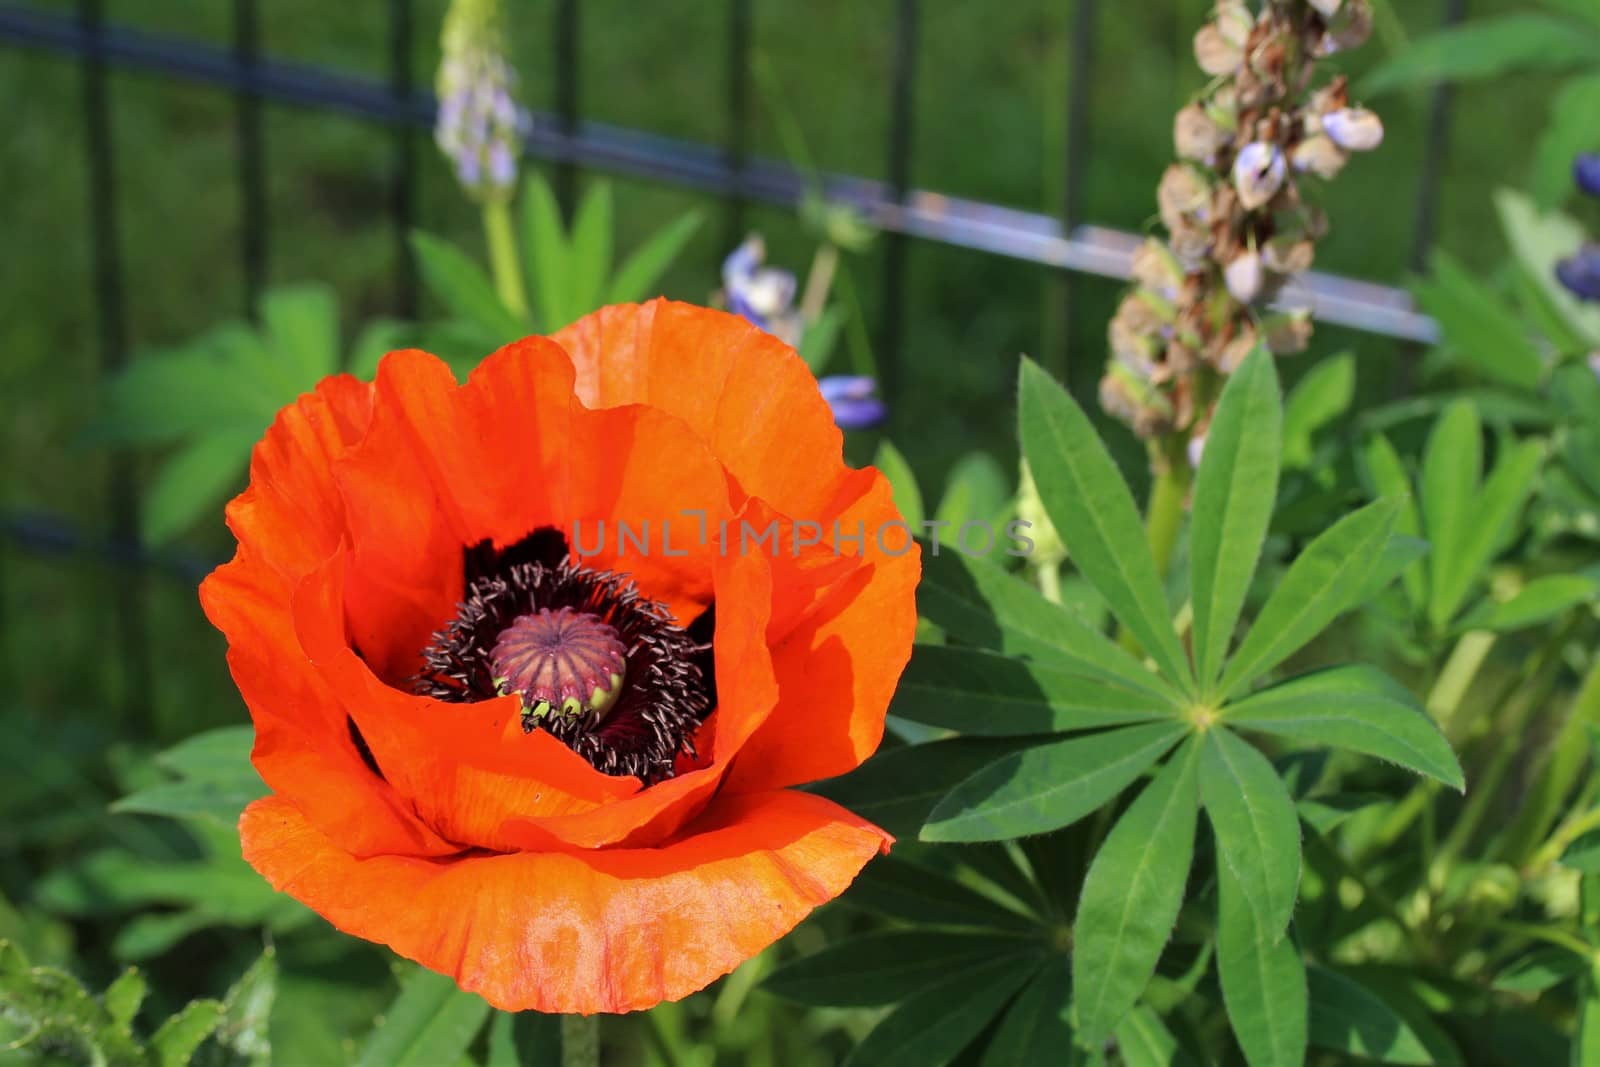 A red poppy flower against a green background and a fence by Luise123